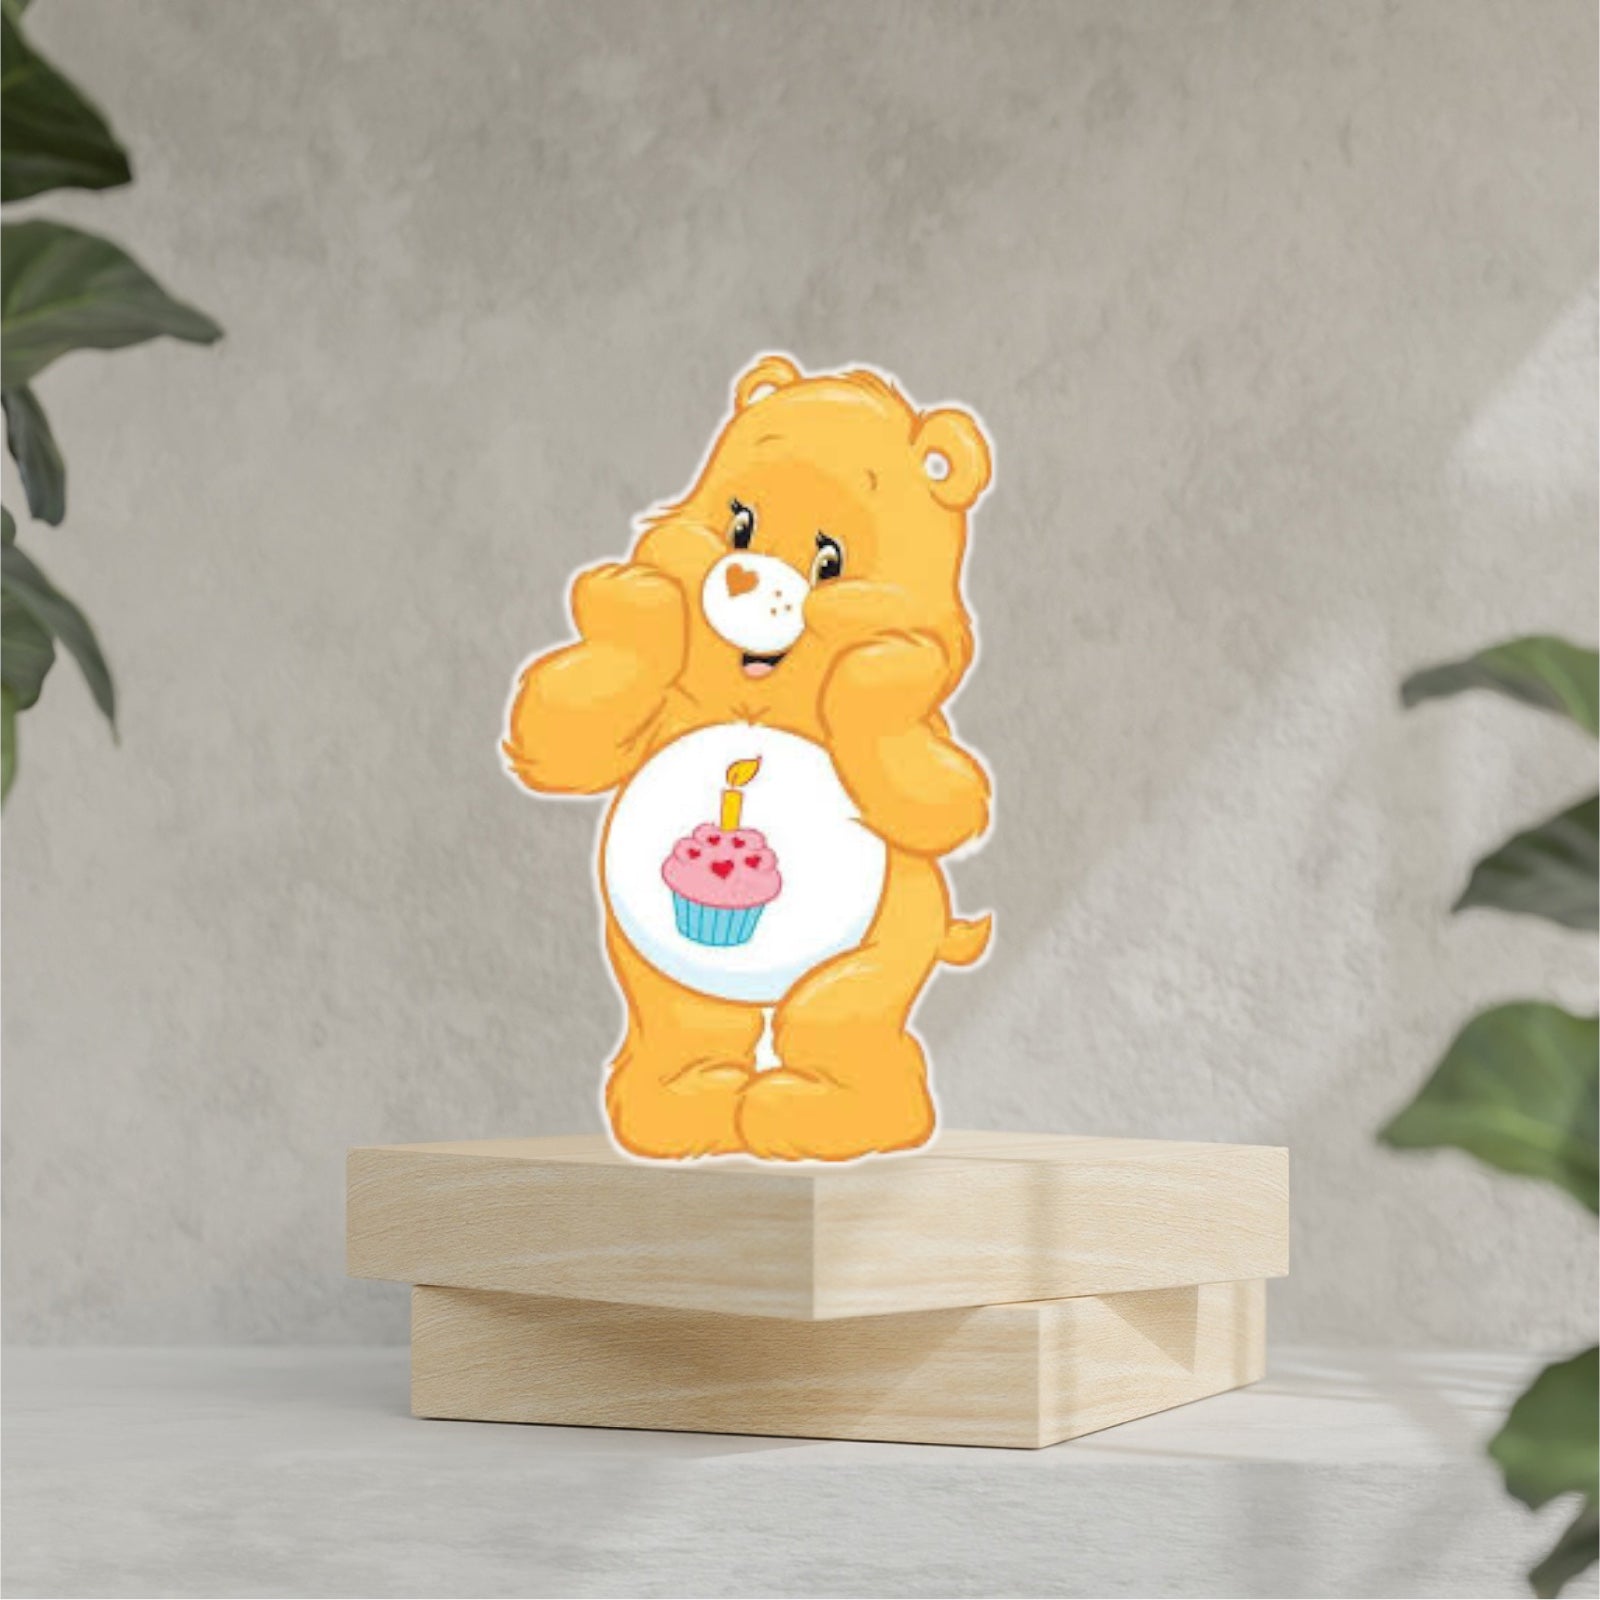 care bear party decorations Care Bear